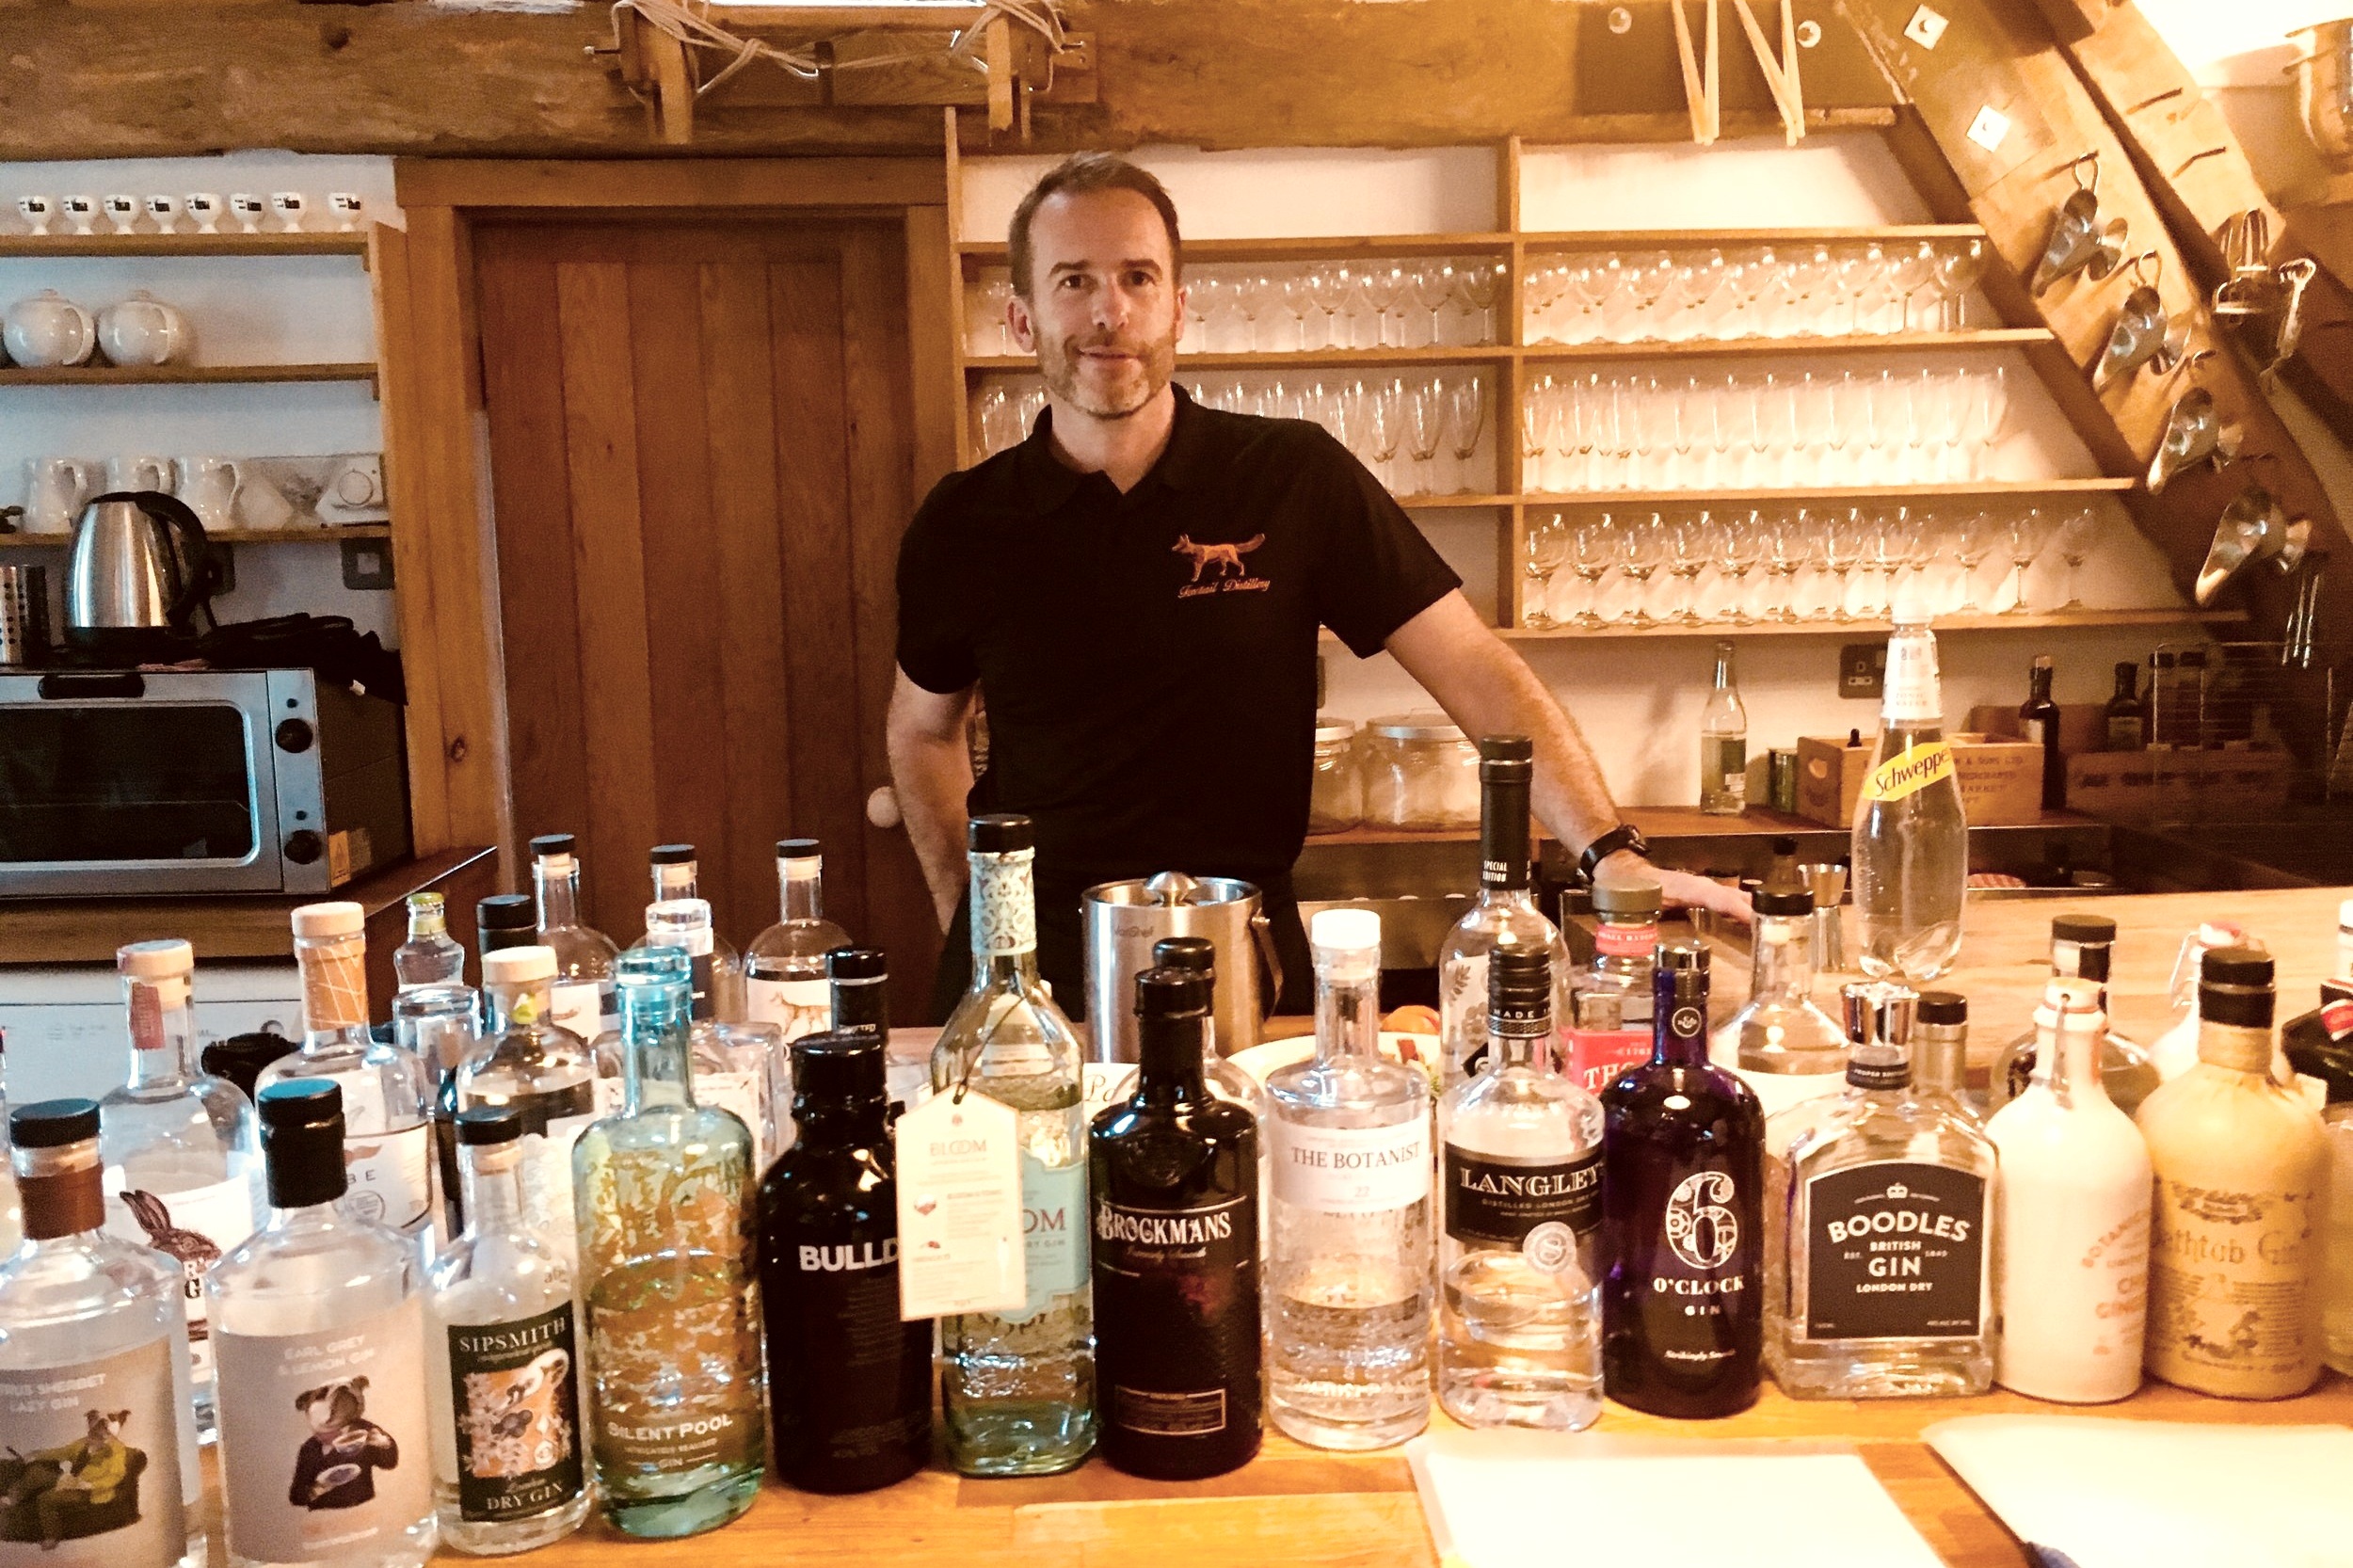 Private Gin Tasting experience with Foxtail Gin - learn about the medicinal origins of Gin &amp; tasting approach used to describe the ‘nose’, ‘intensity’ and flavour of each, then blend your own gin.